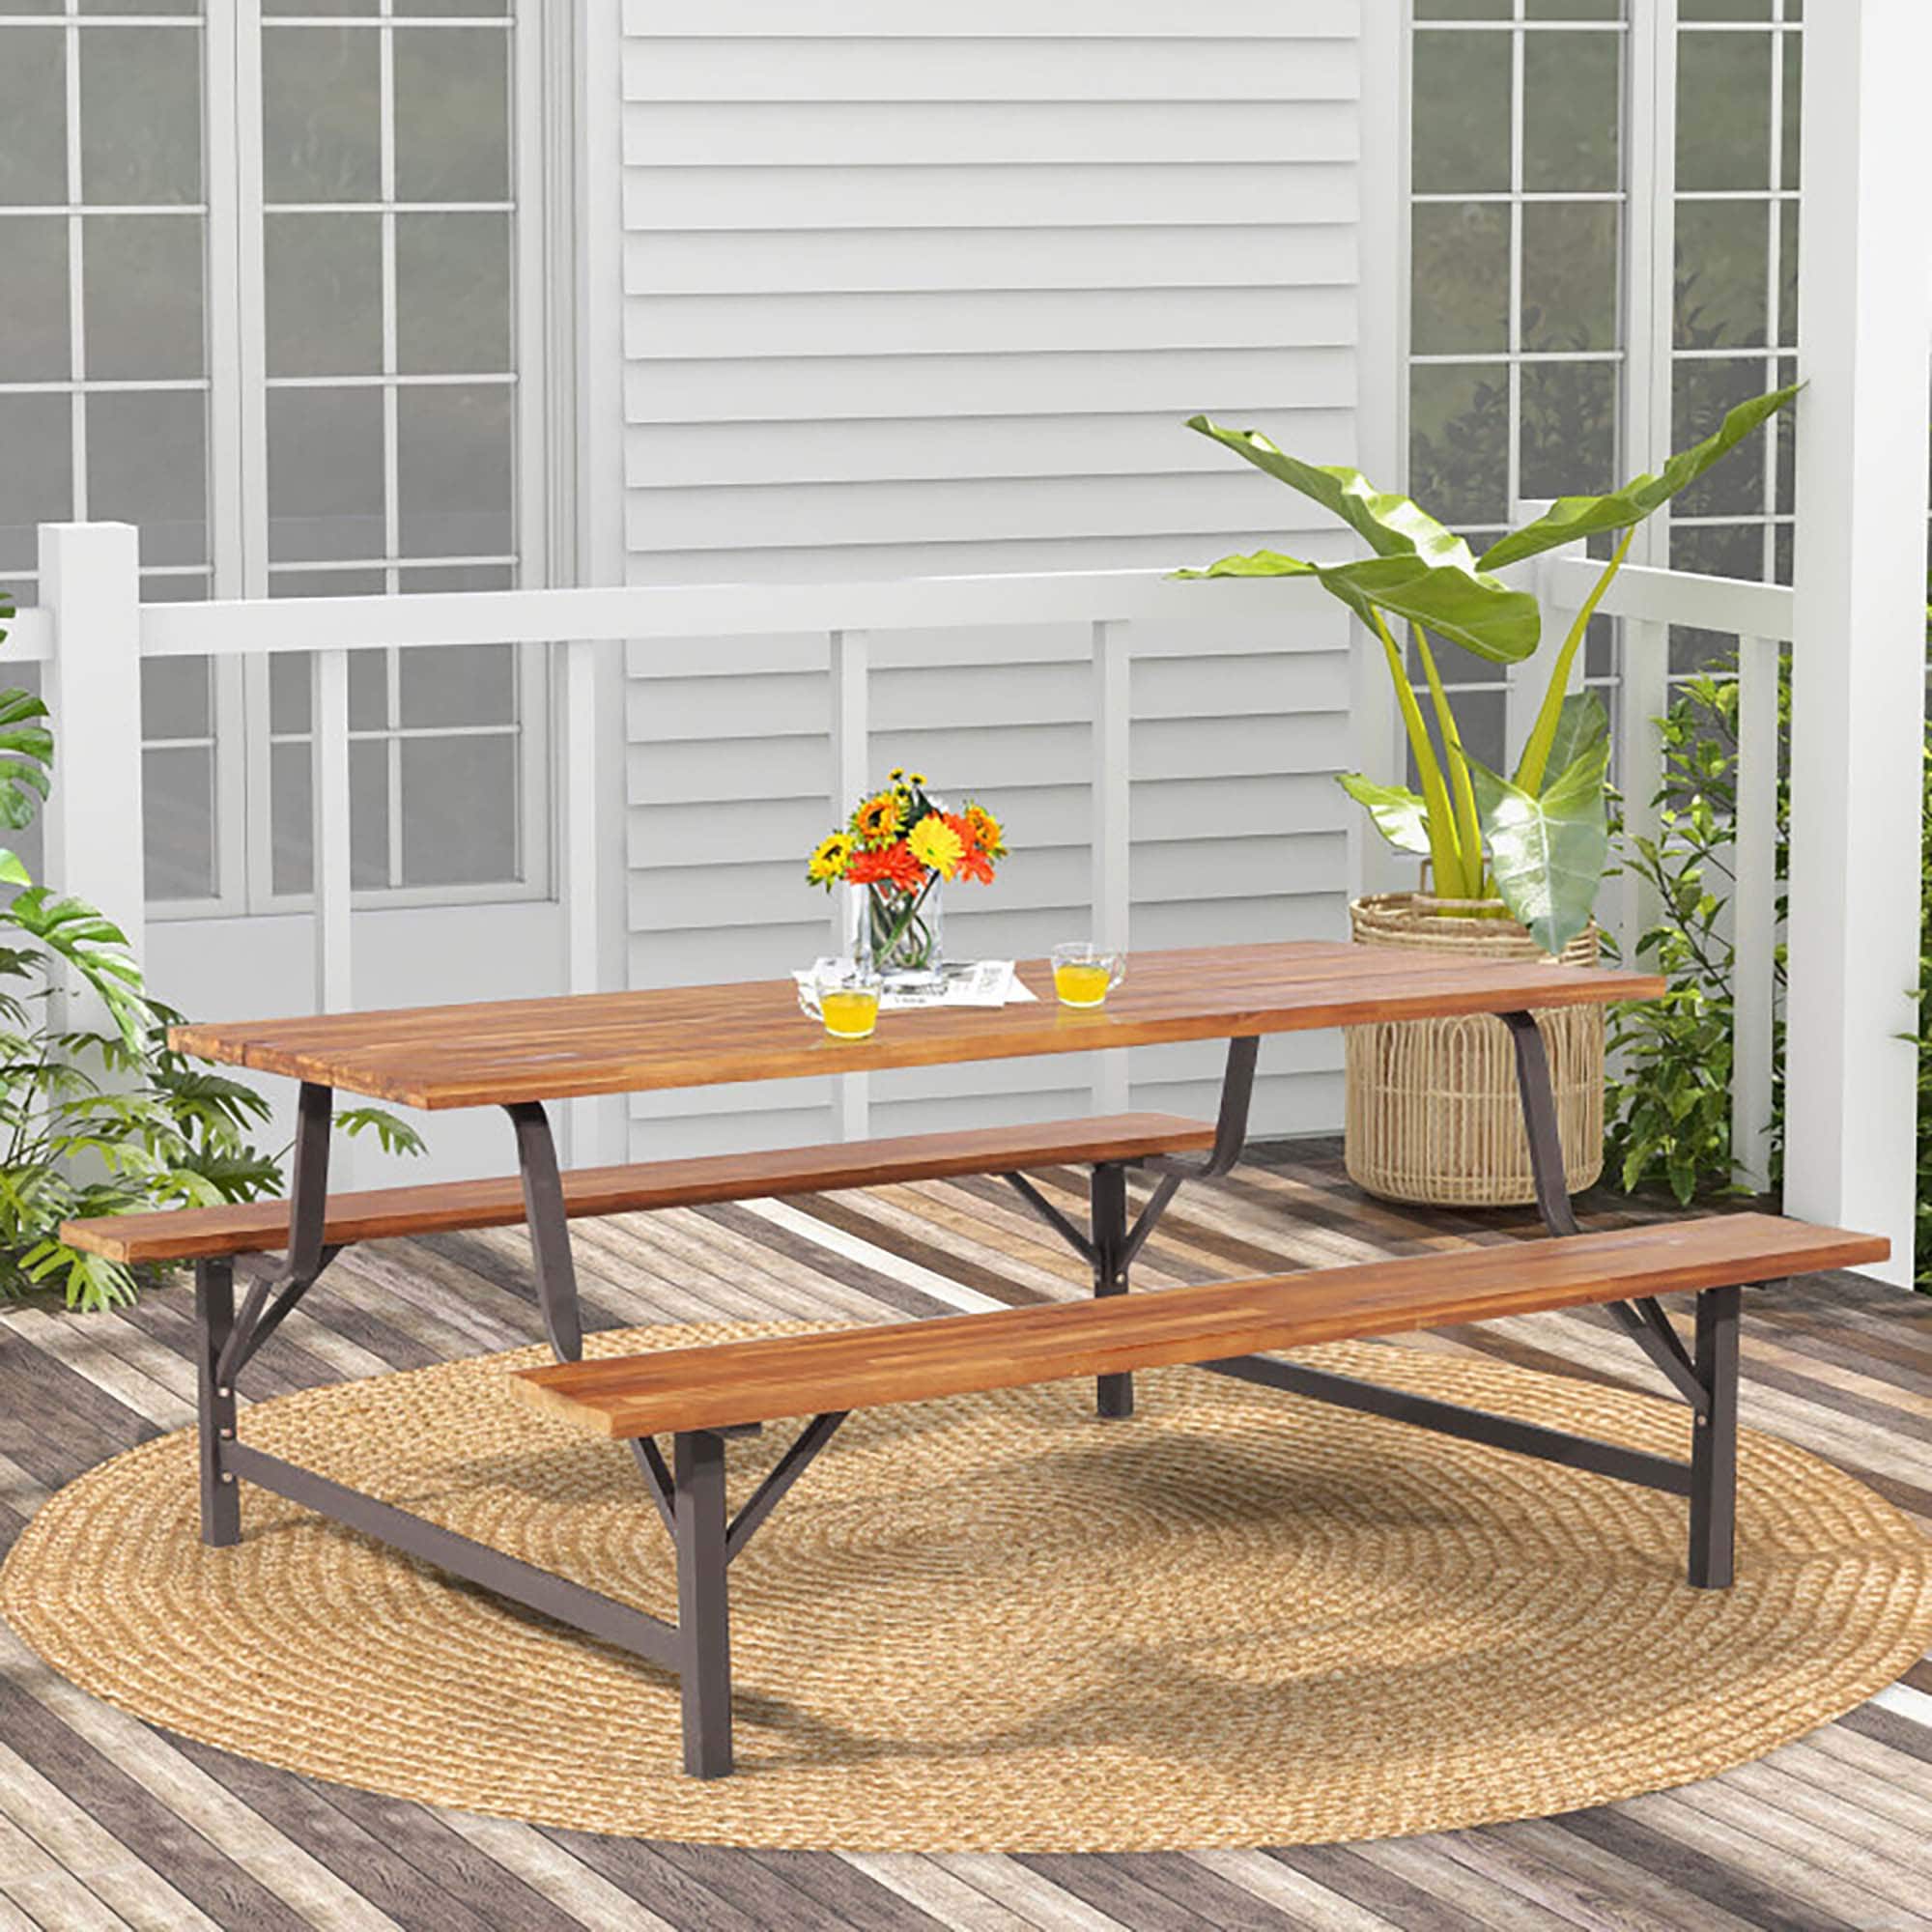 Better Homes Gardens Kennedy Pointe Rectangular Outdoor Dining Table ...